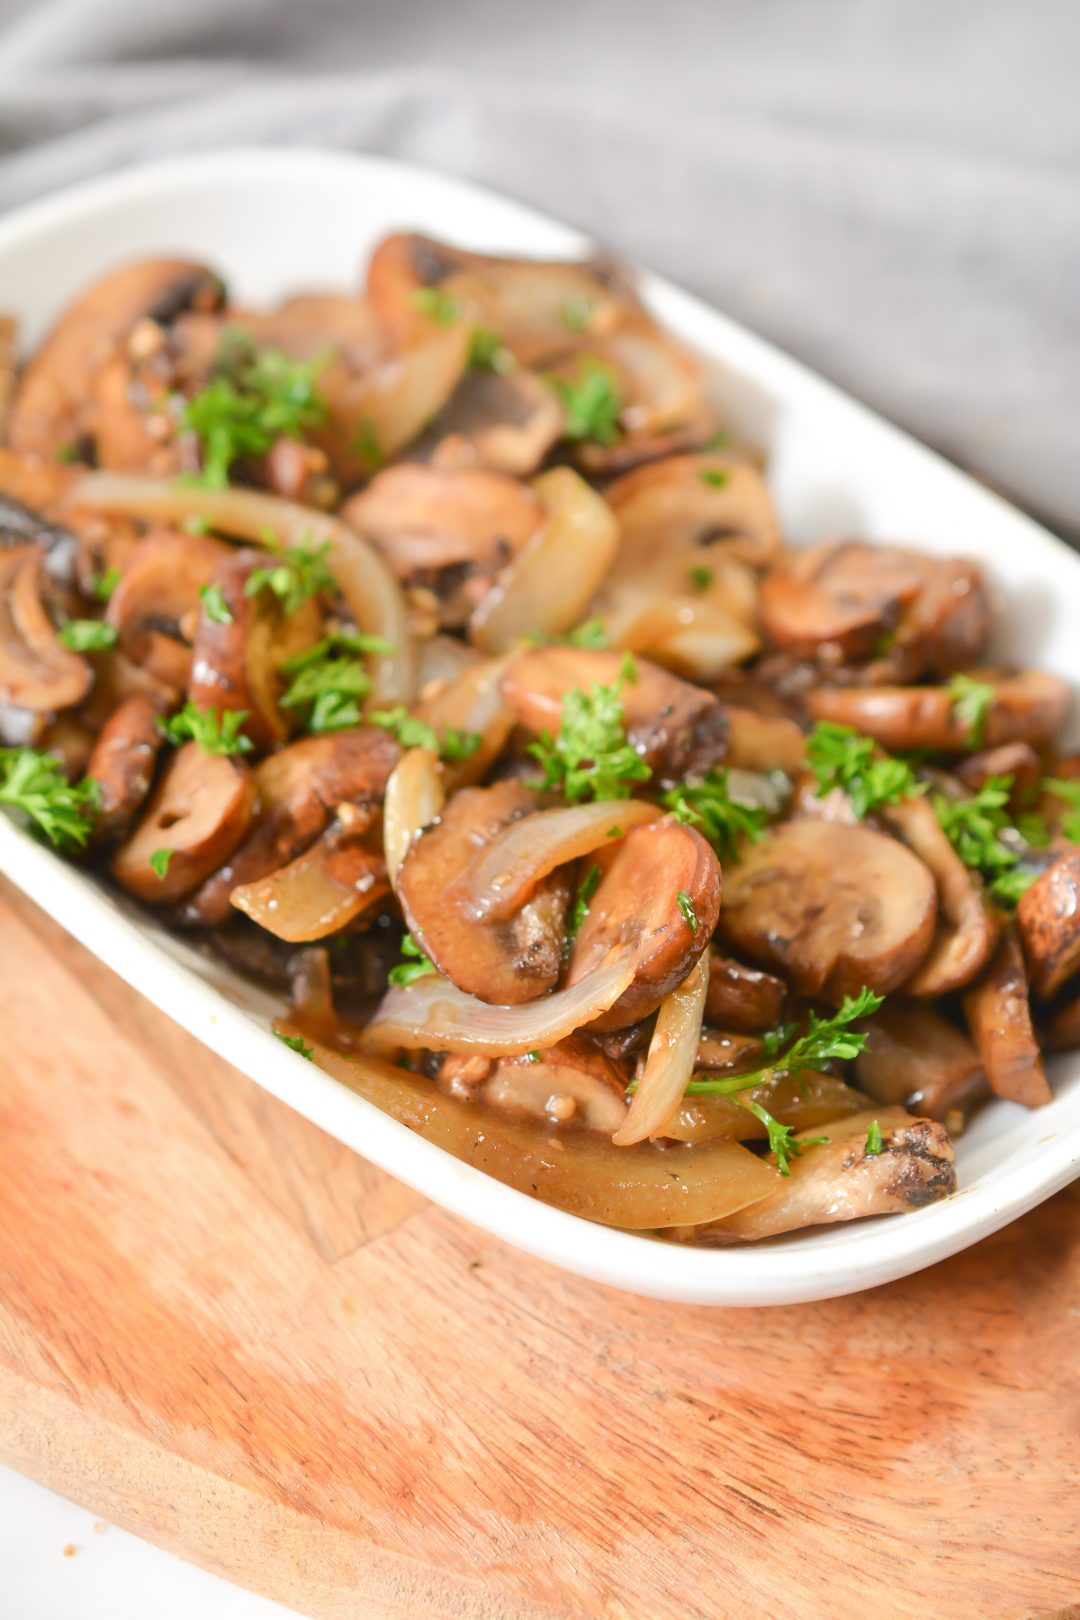 Sauteed Balsamic Mushrooms - From Gate To Plate